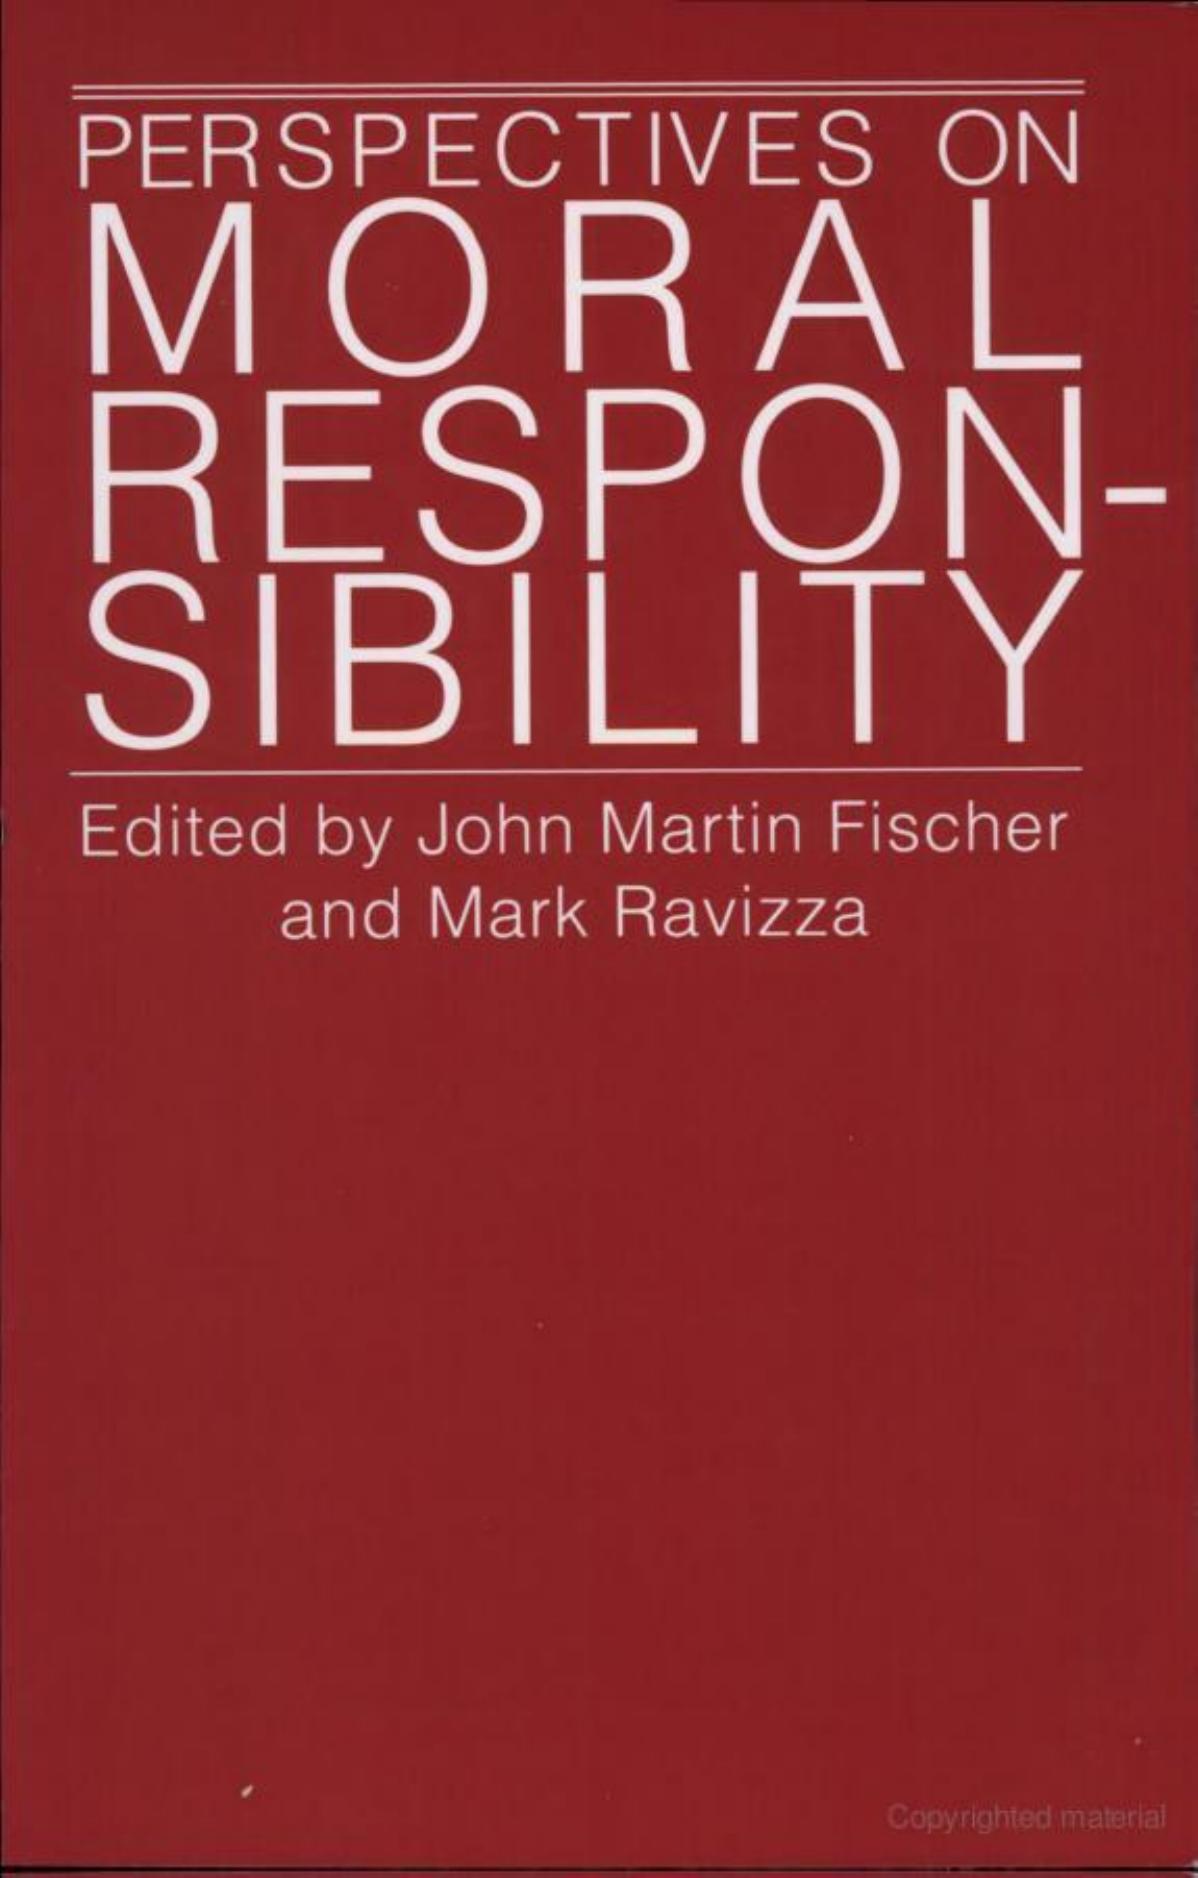 Perspectives on Moral Responsibility